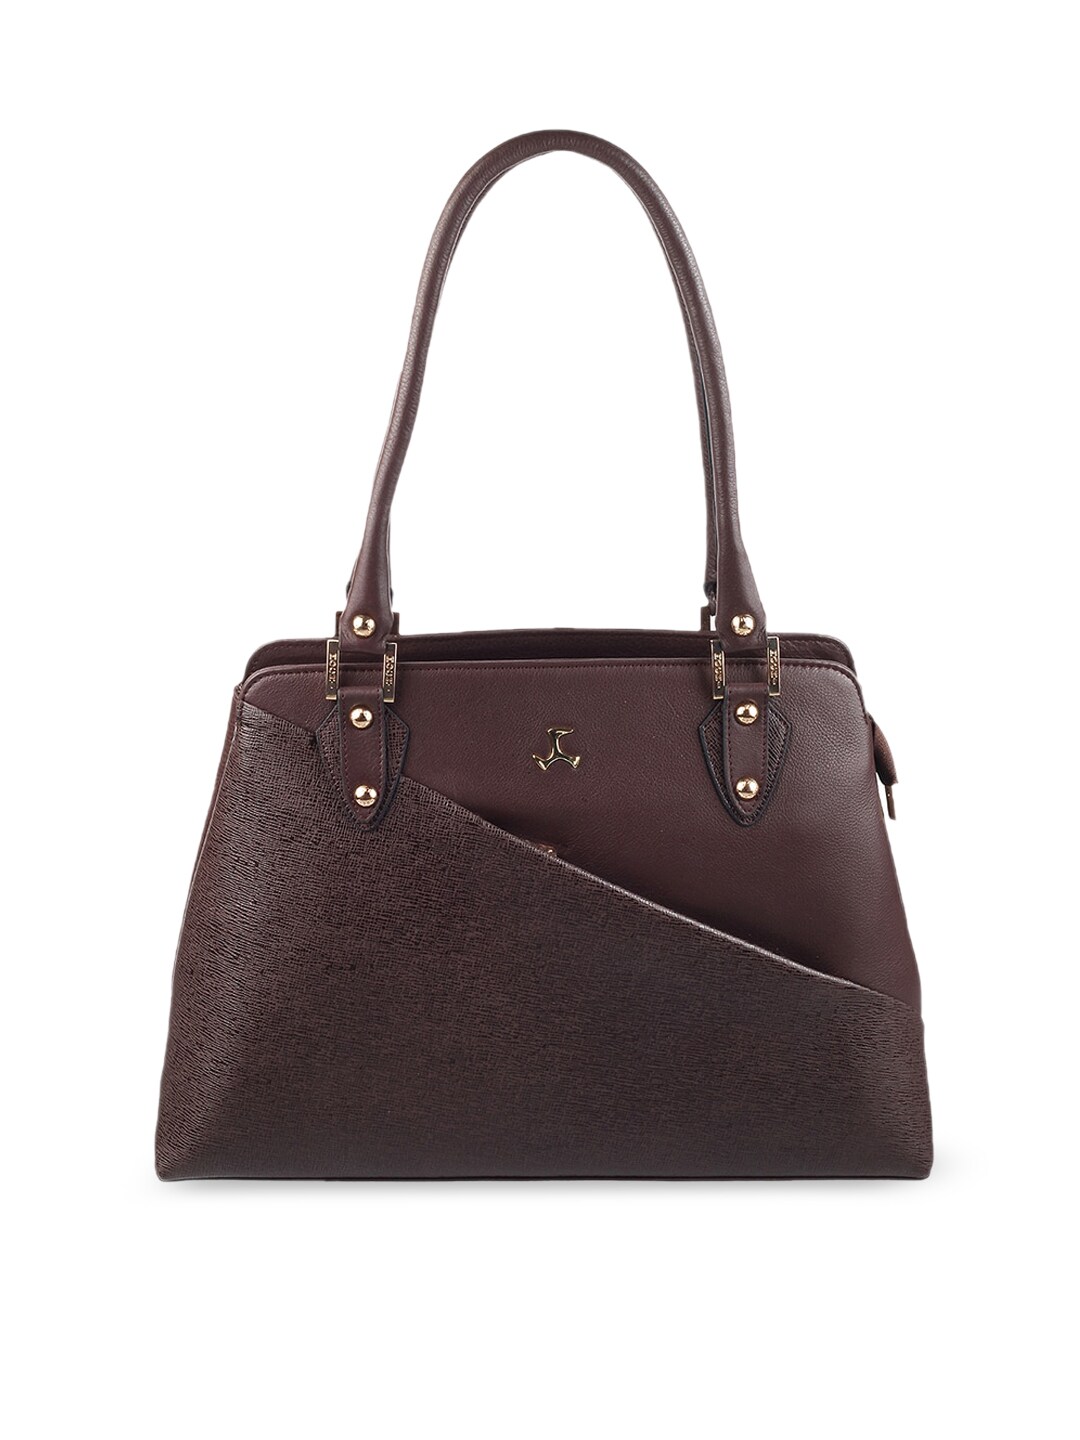 Mochi Brown Textured Leather Structured Shoulder Bag Price in India